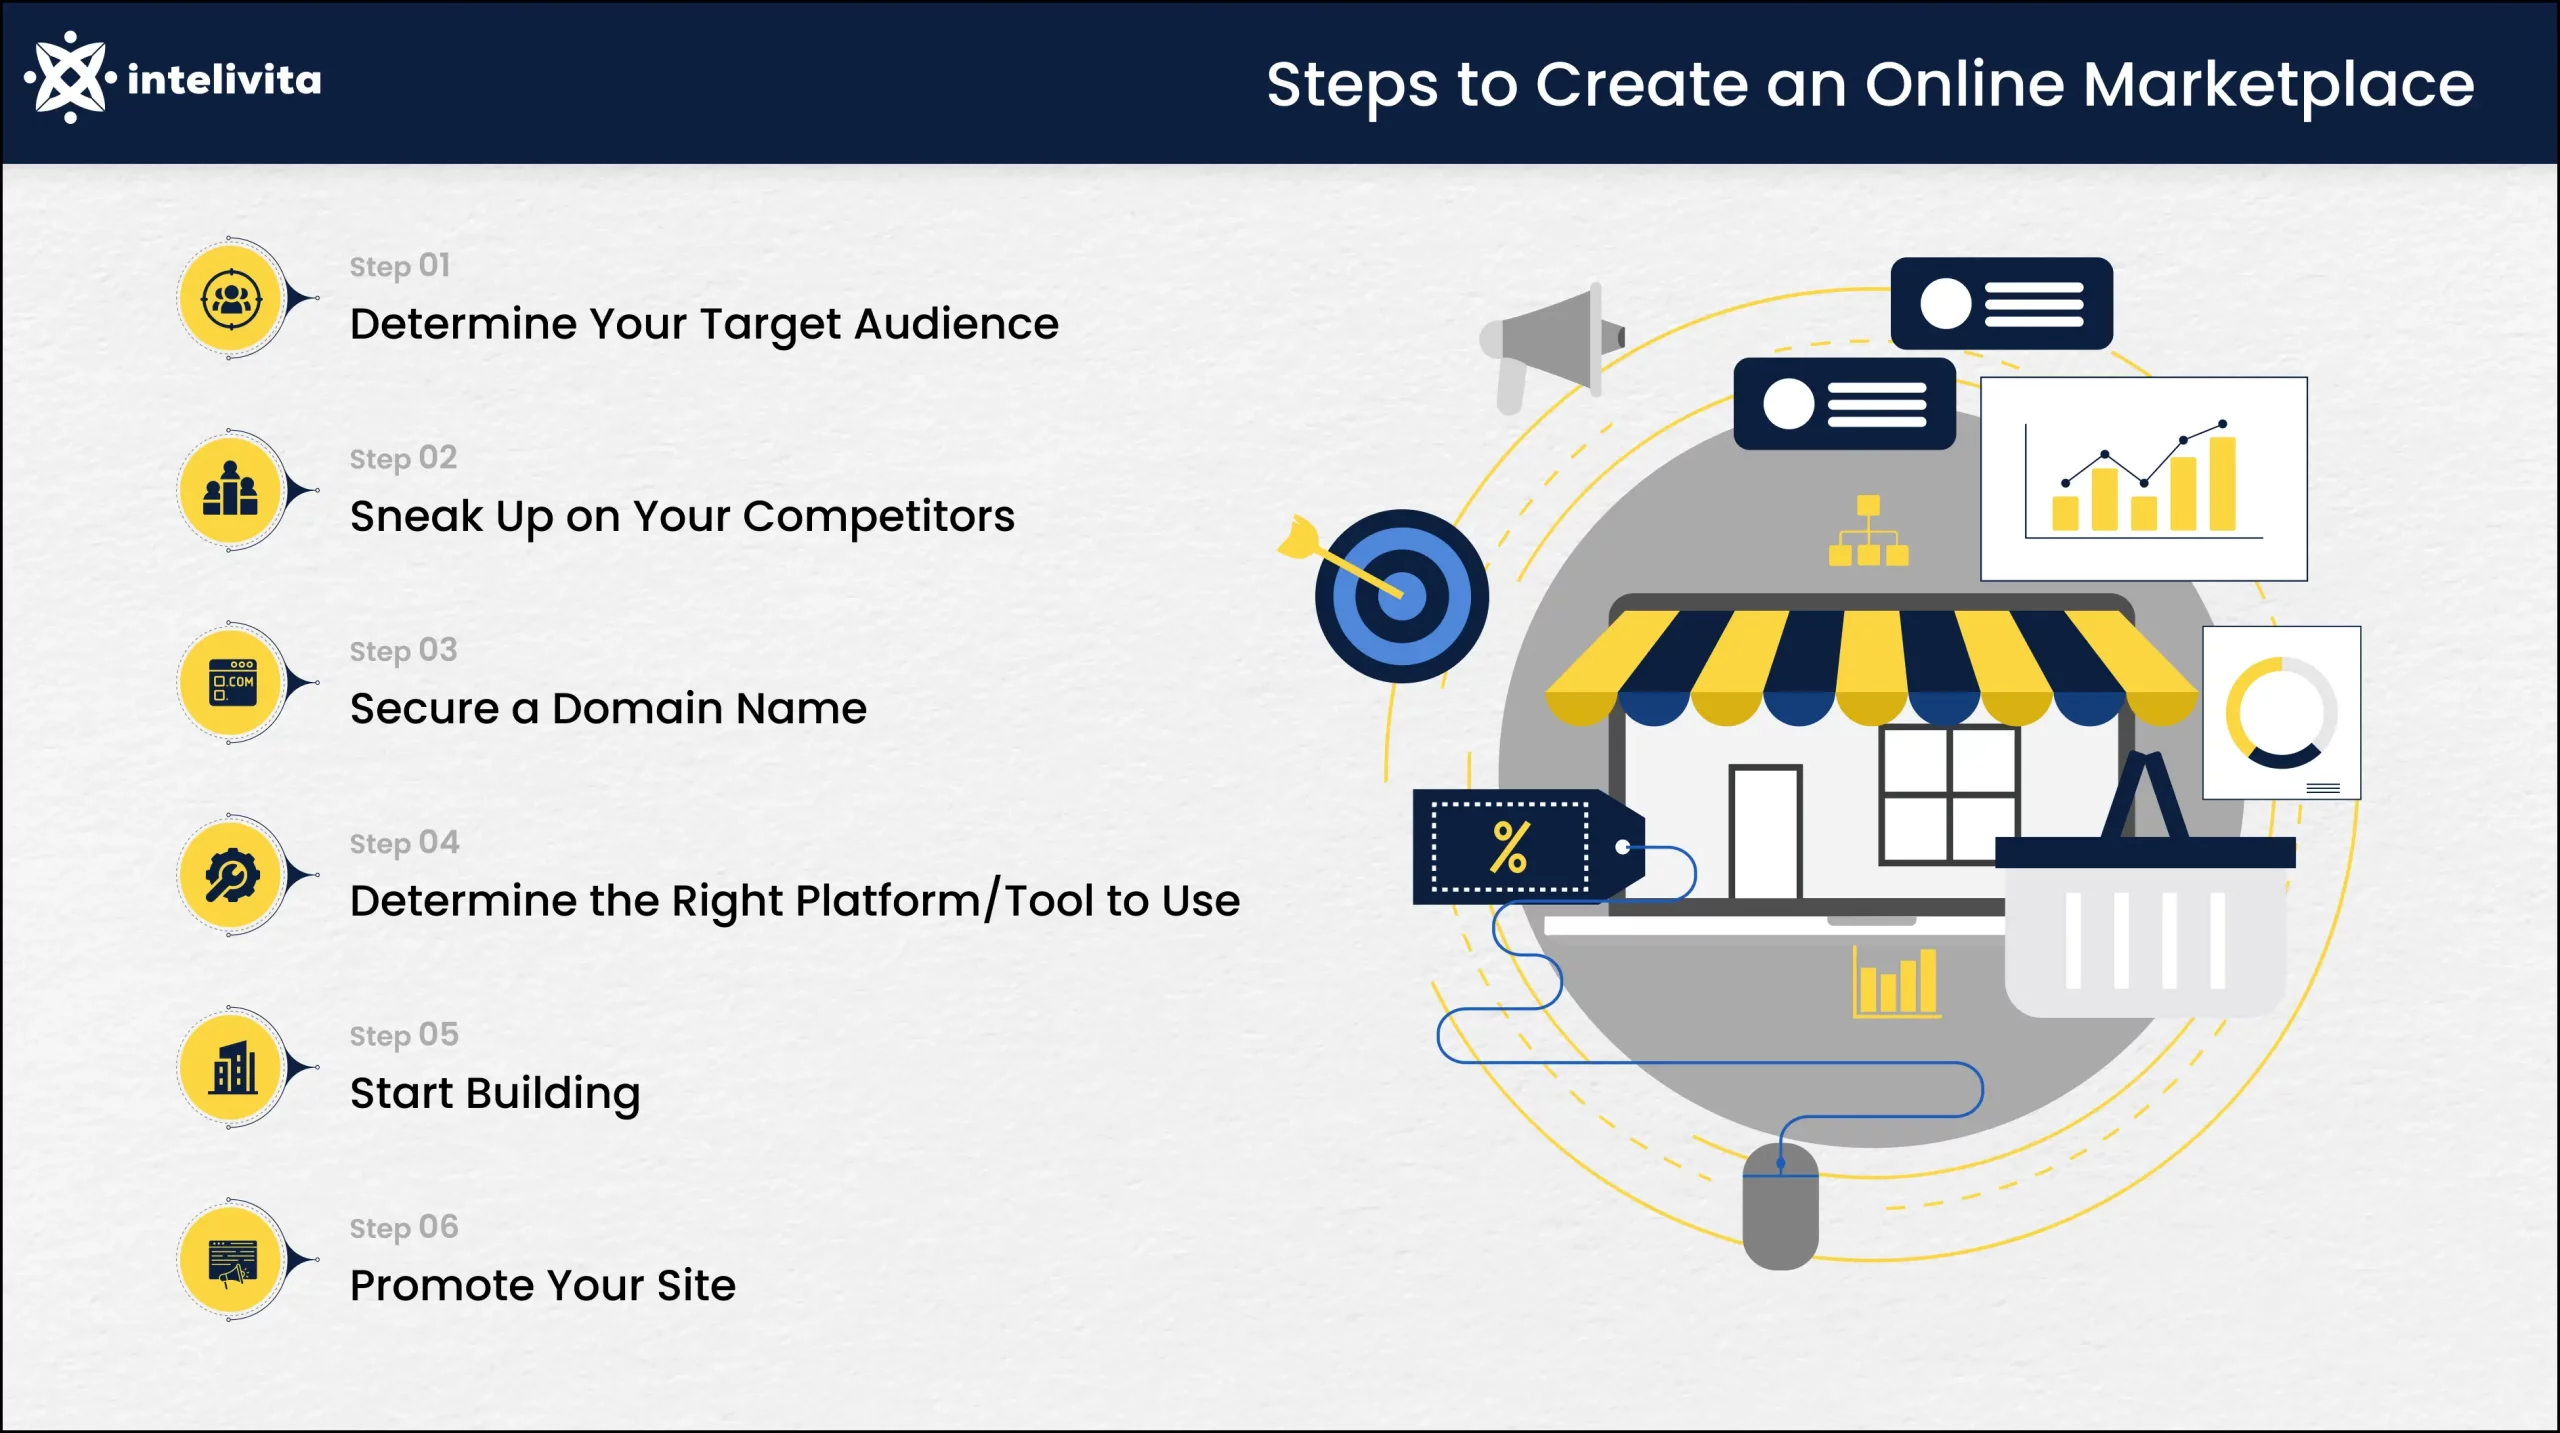 Image displaying the steps to create an online marketplace.